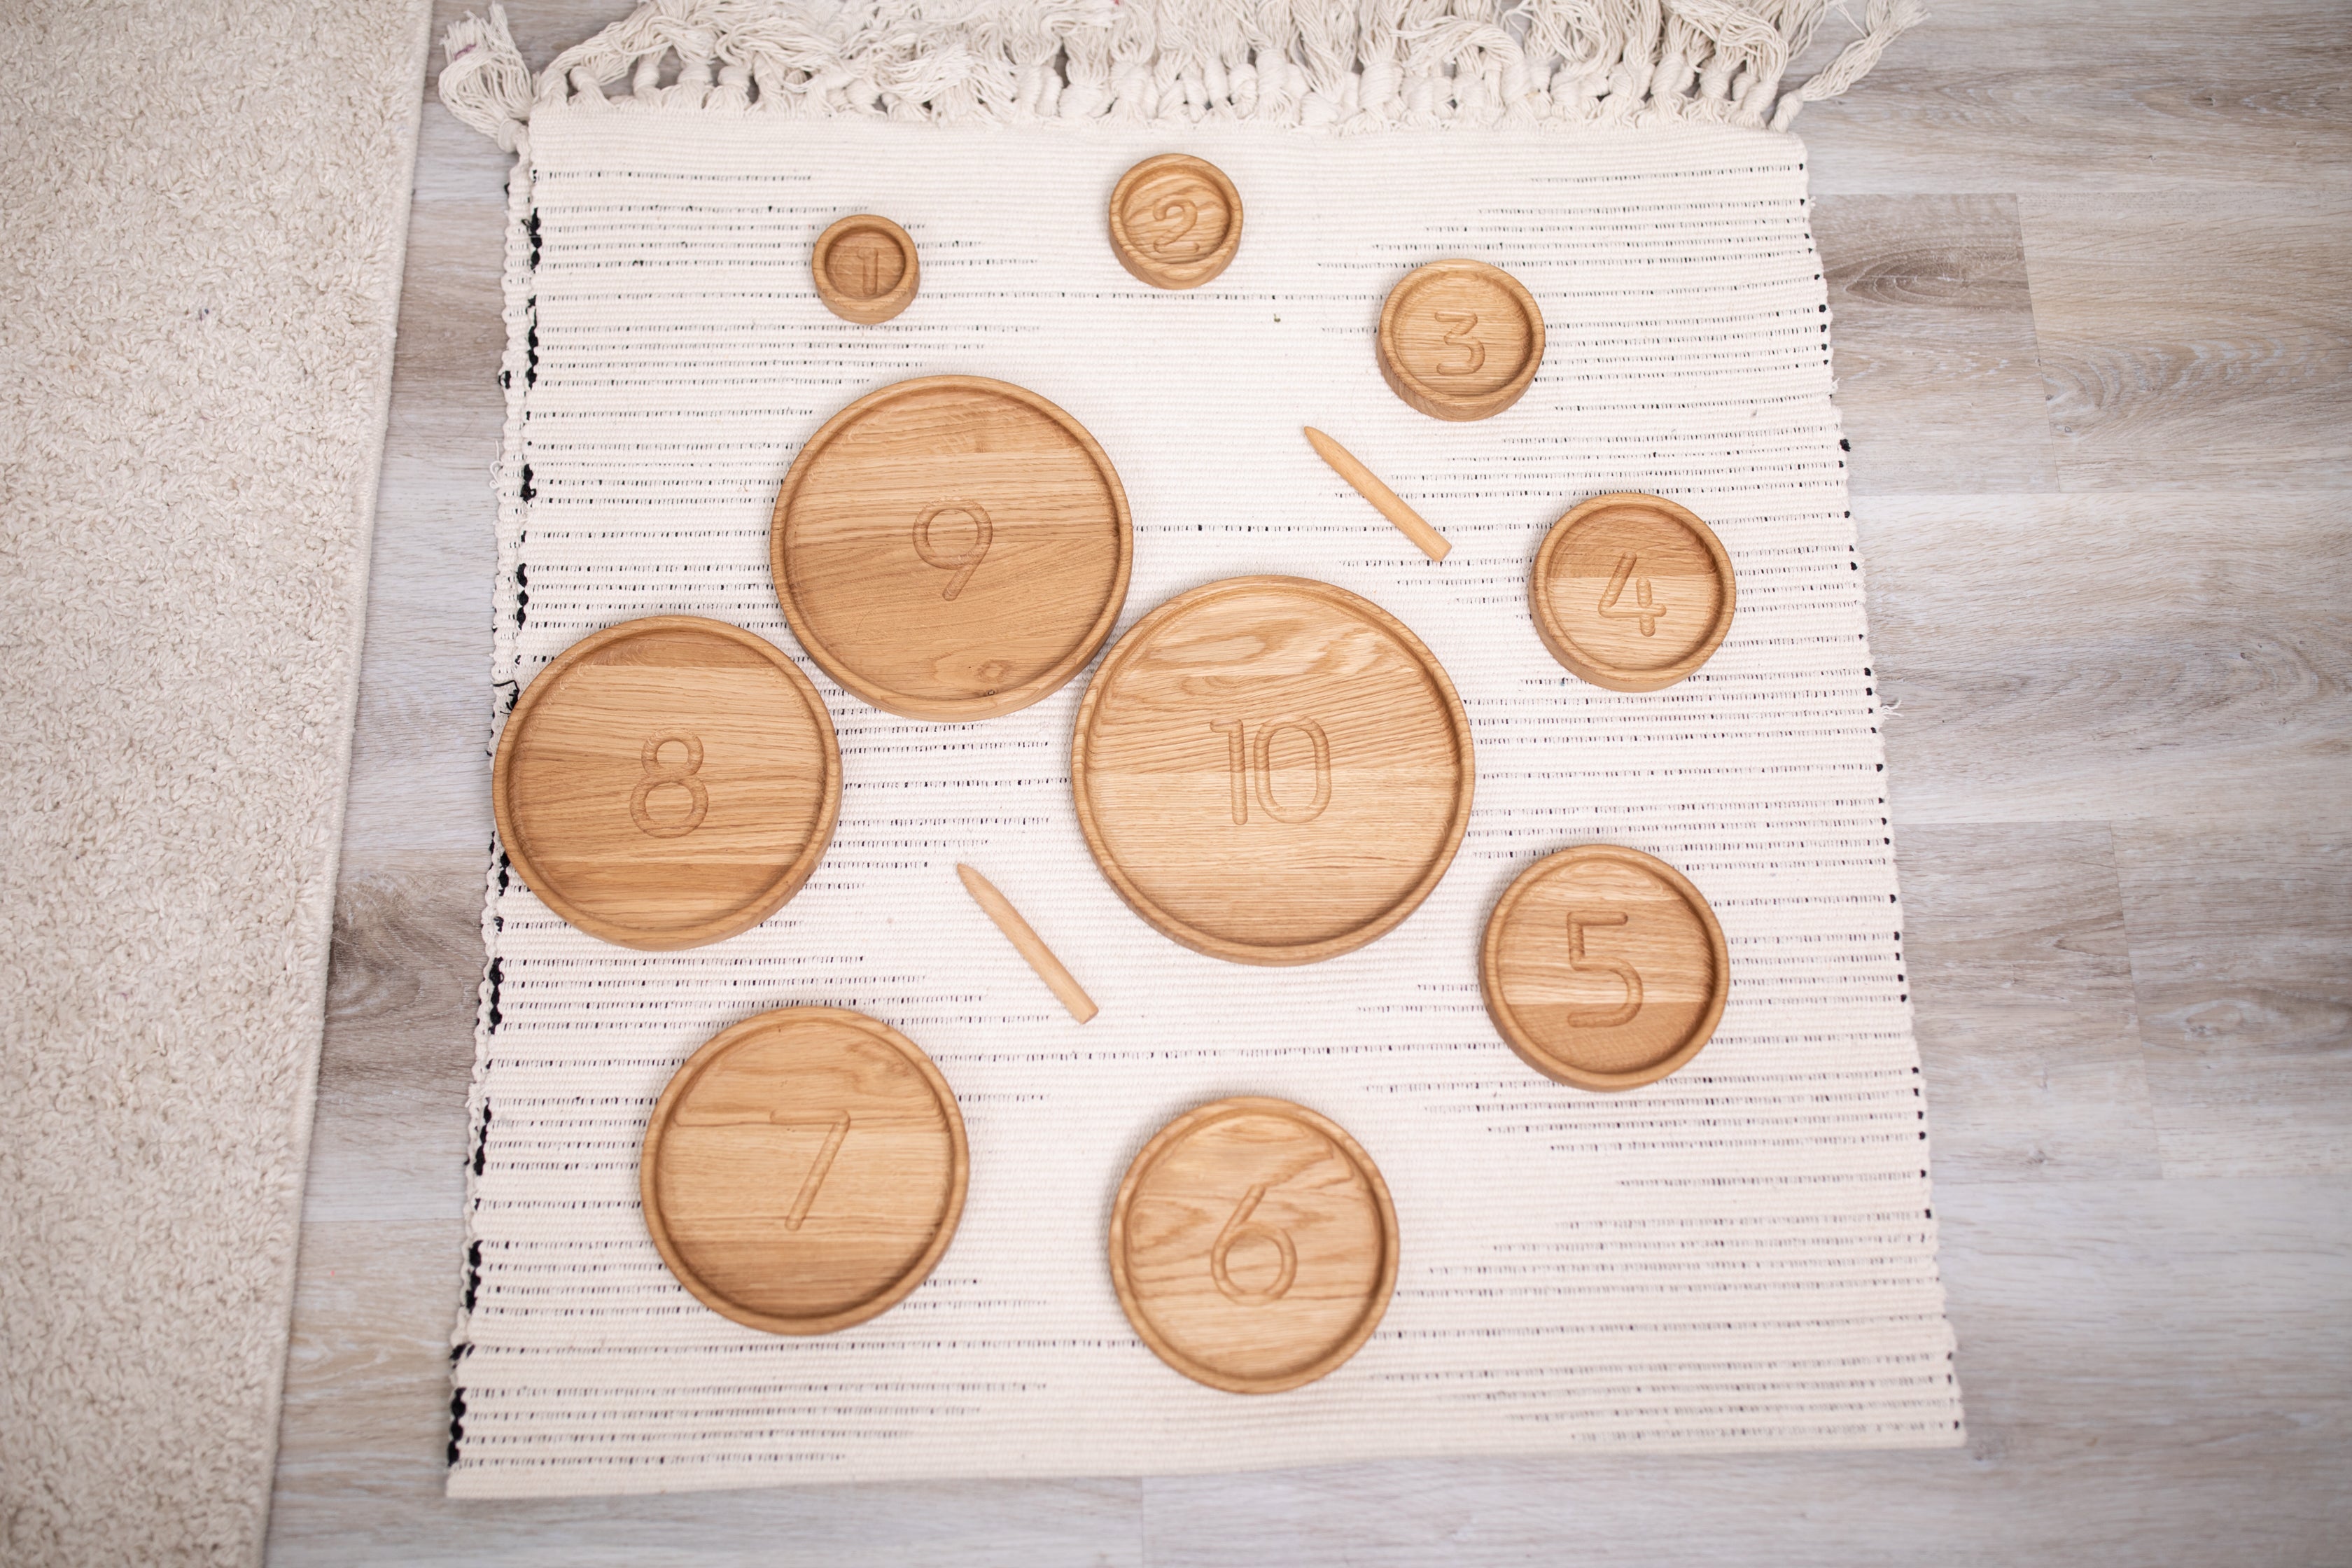 Sorting Plates or Trays with Numbers, Montessori educational materials, homeschool, learning numbers, toddler gift